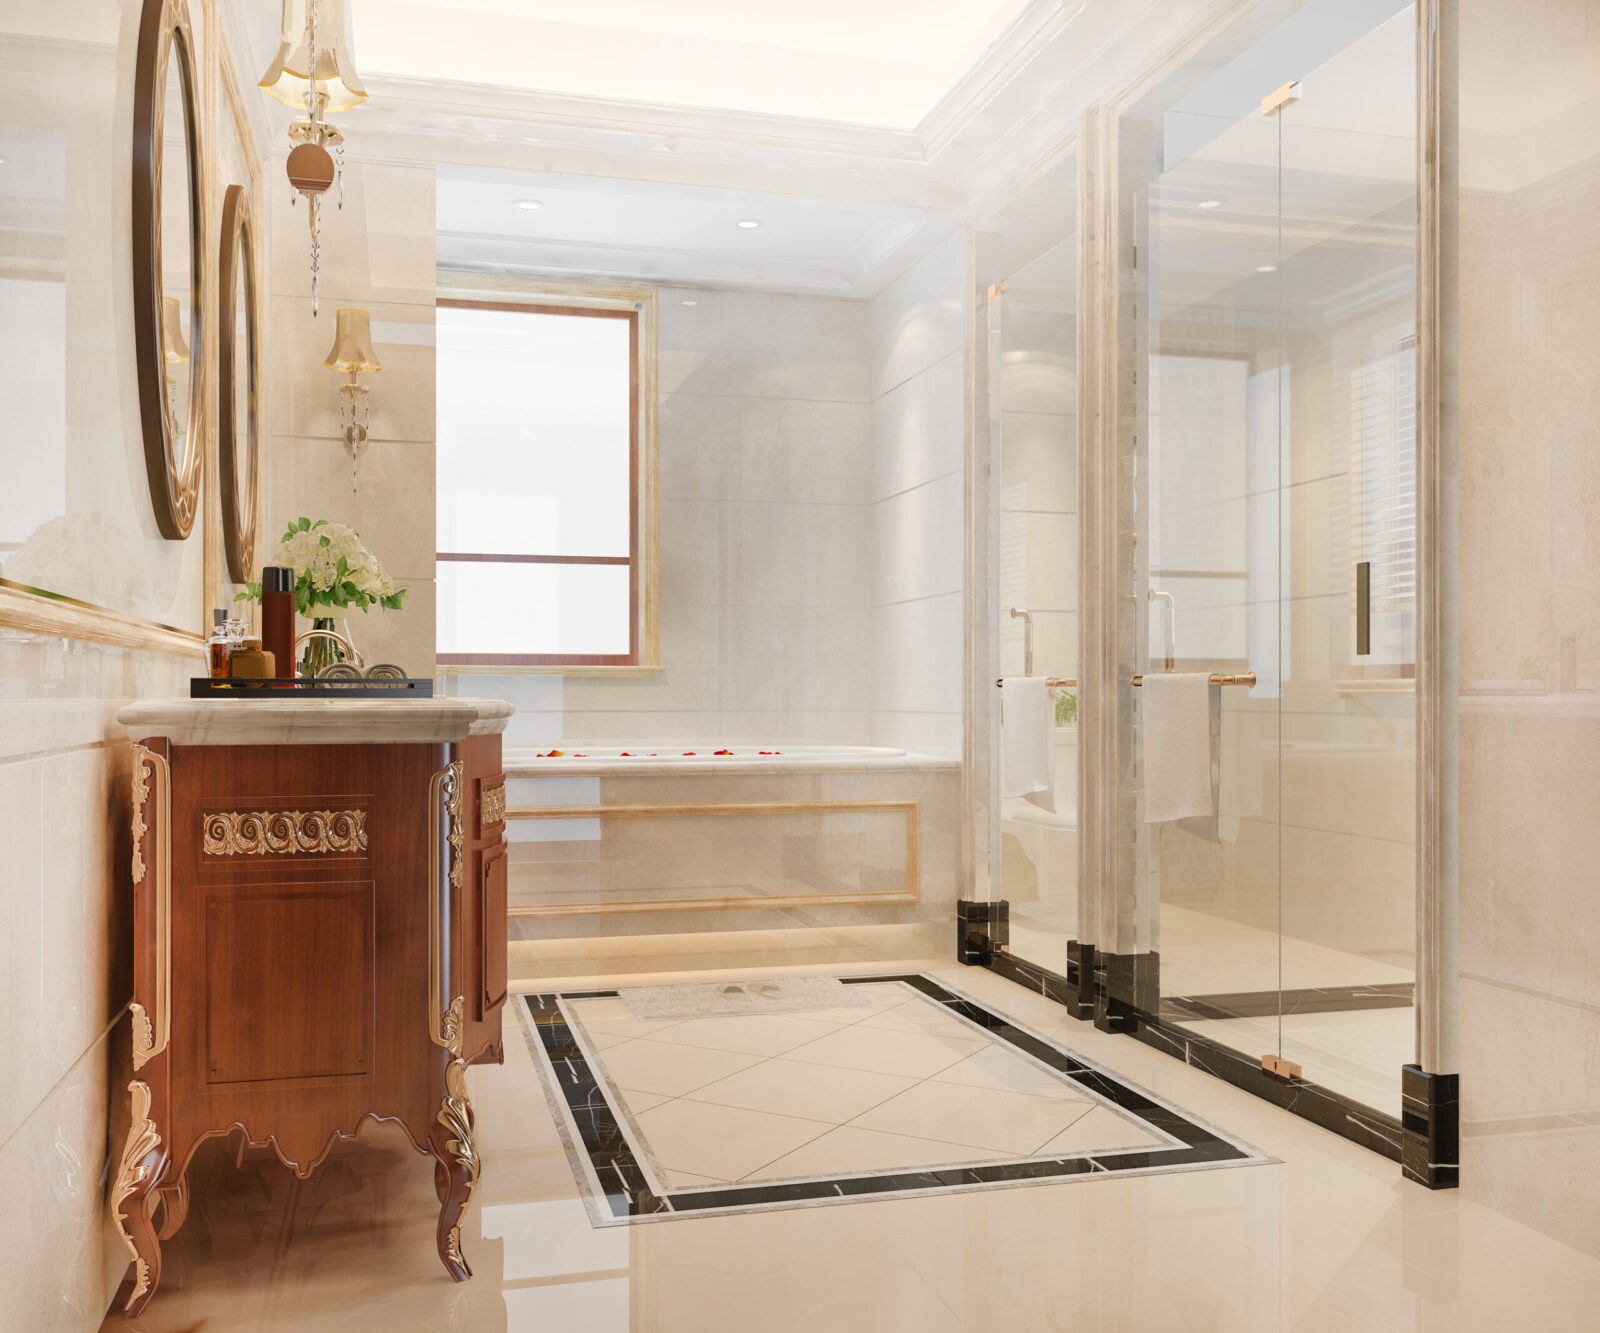 Bathroom Remodeling Services In Rye, White Plains, Scarsdale NY